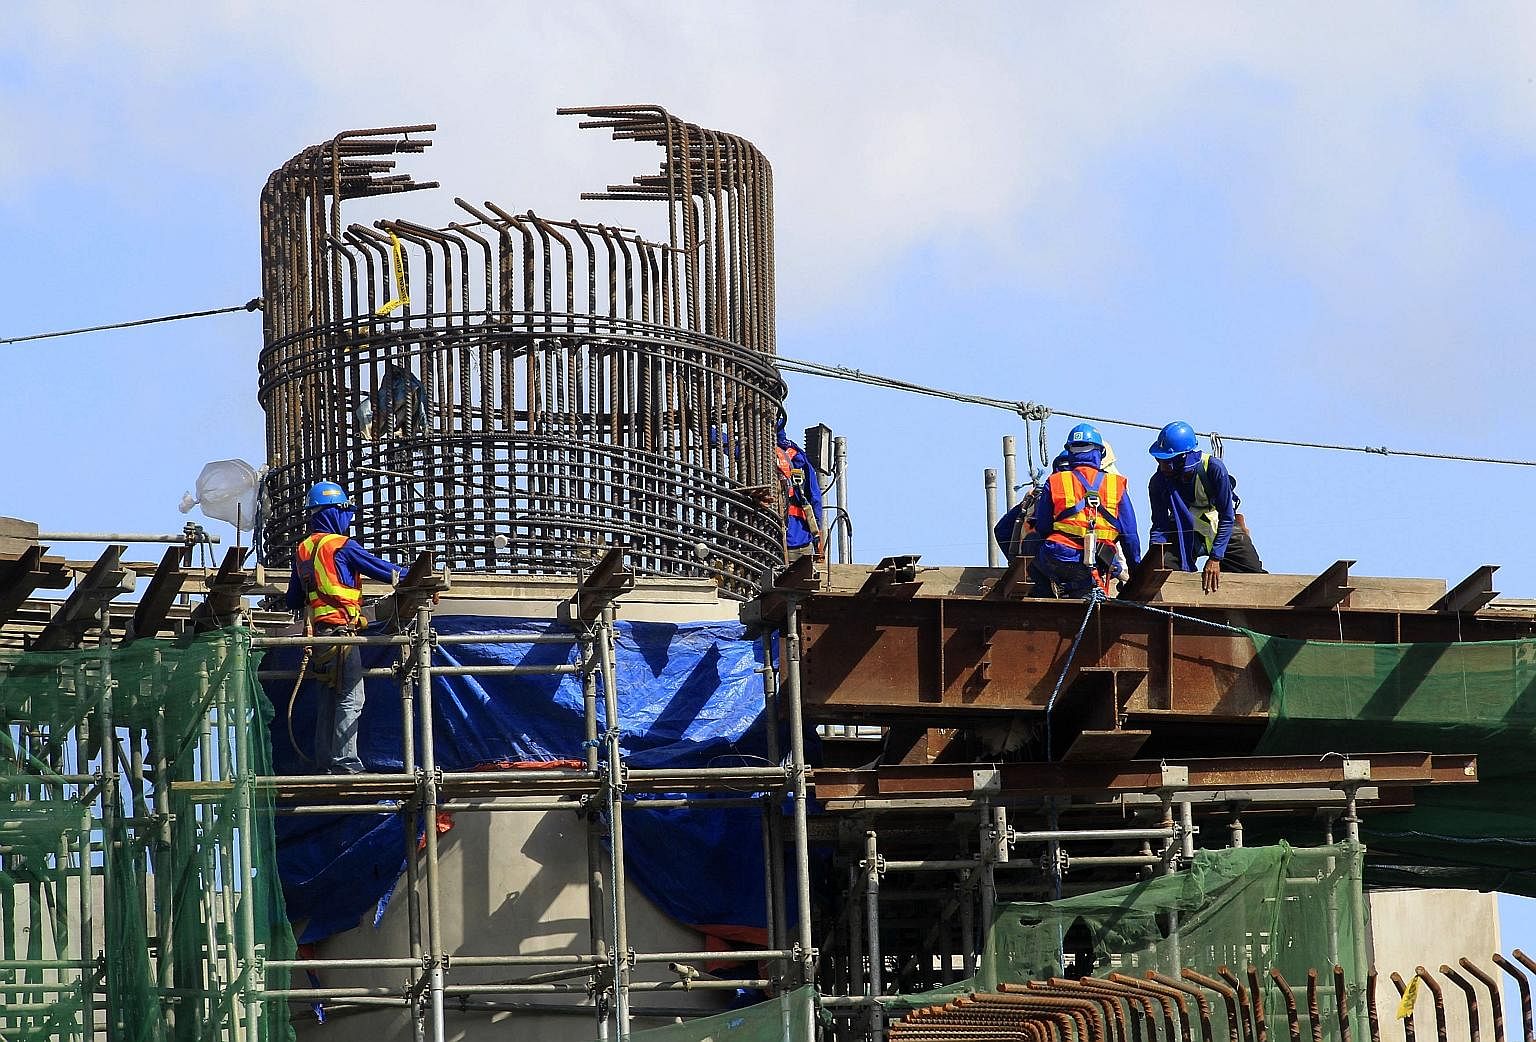 Workers work on an expressway undergoing construction in Manila.The Philippine government is focusing its infrastructure works in the development of ports, expressways and energy projects. Rising urbanisation in countries, such as Indonesia, will spu